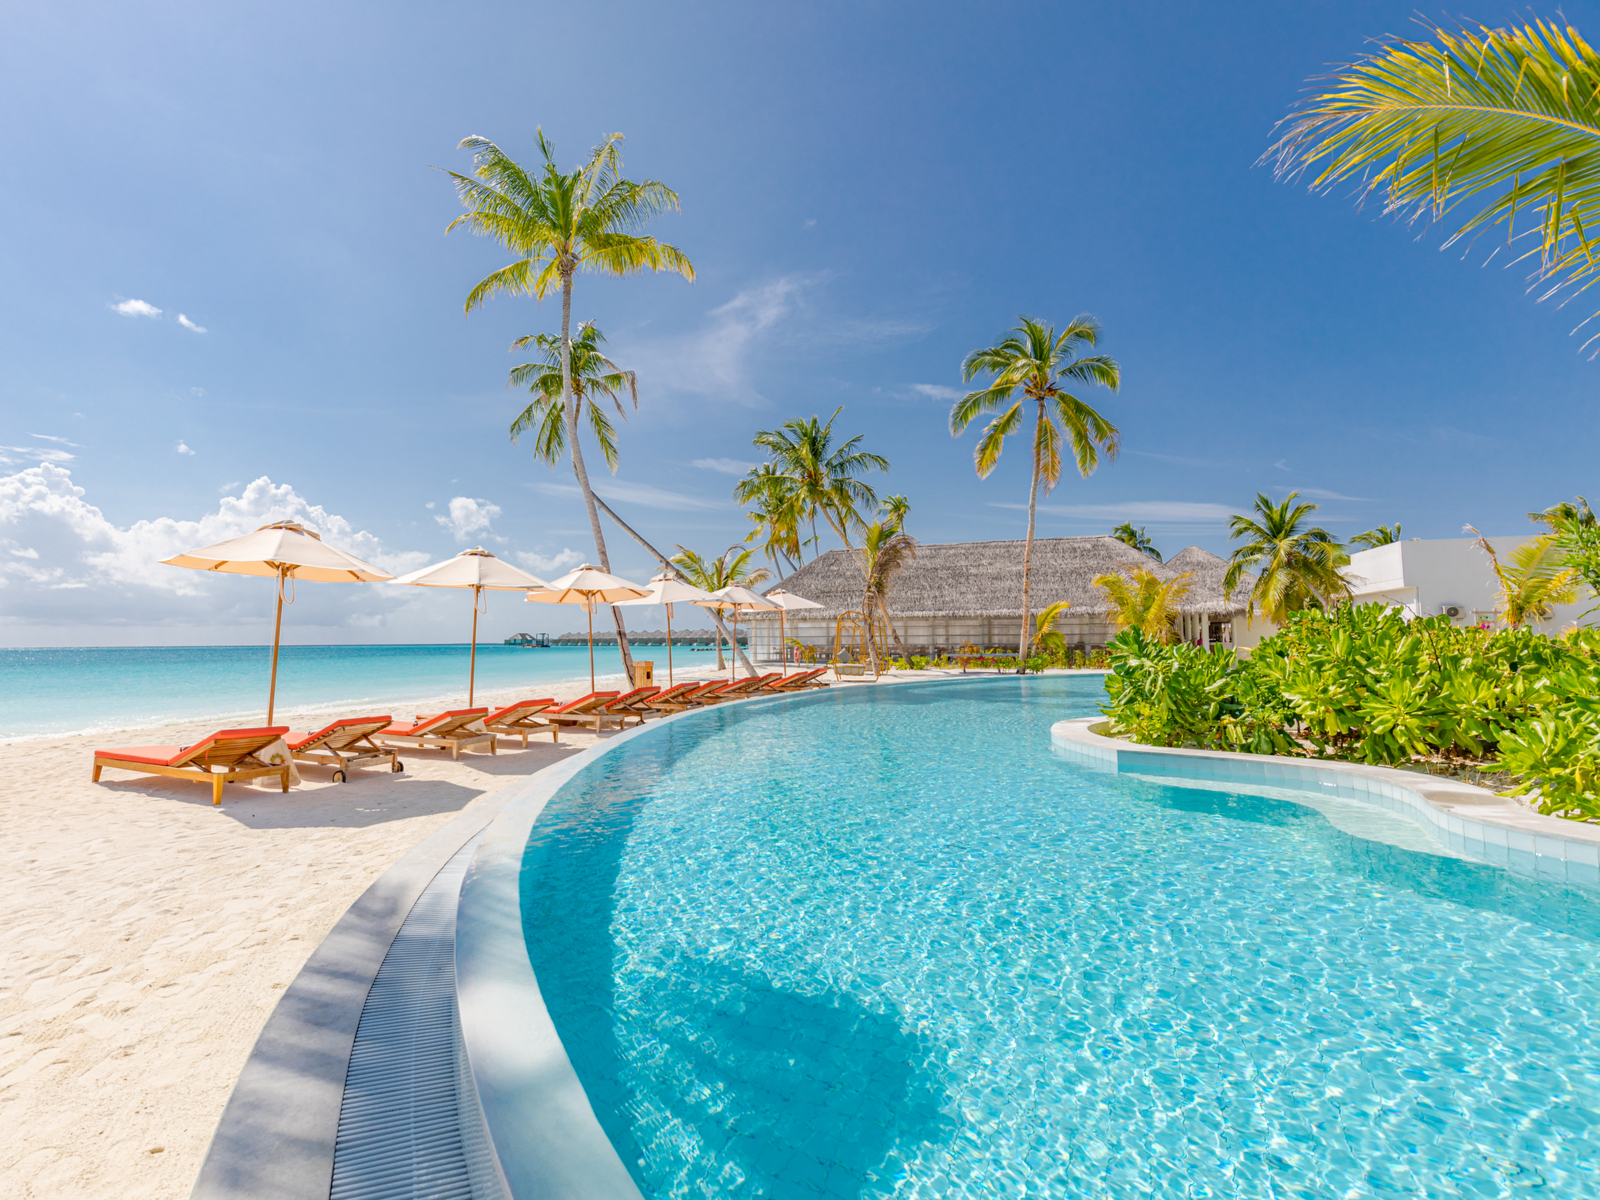 One of the best all-inclusive resorts in the Caribbean seen from the pool deck looking into the ocean